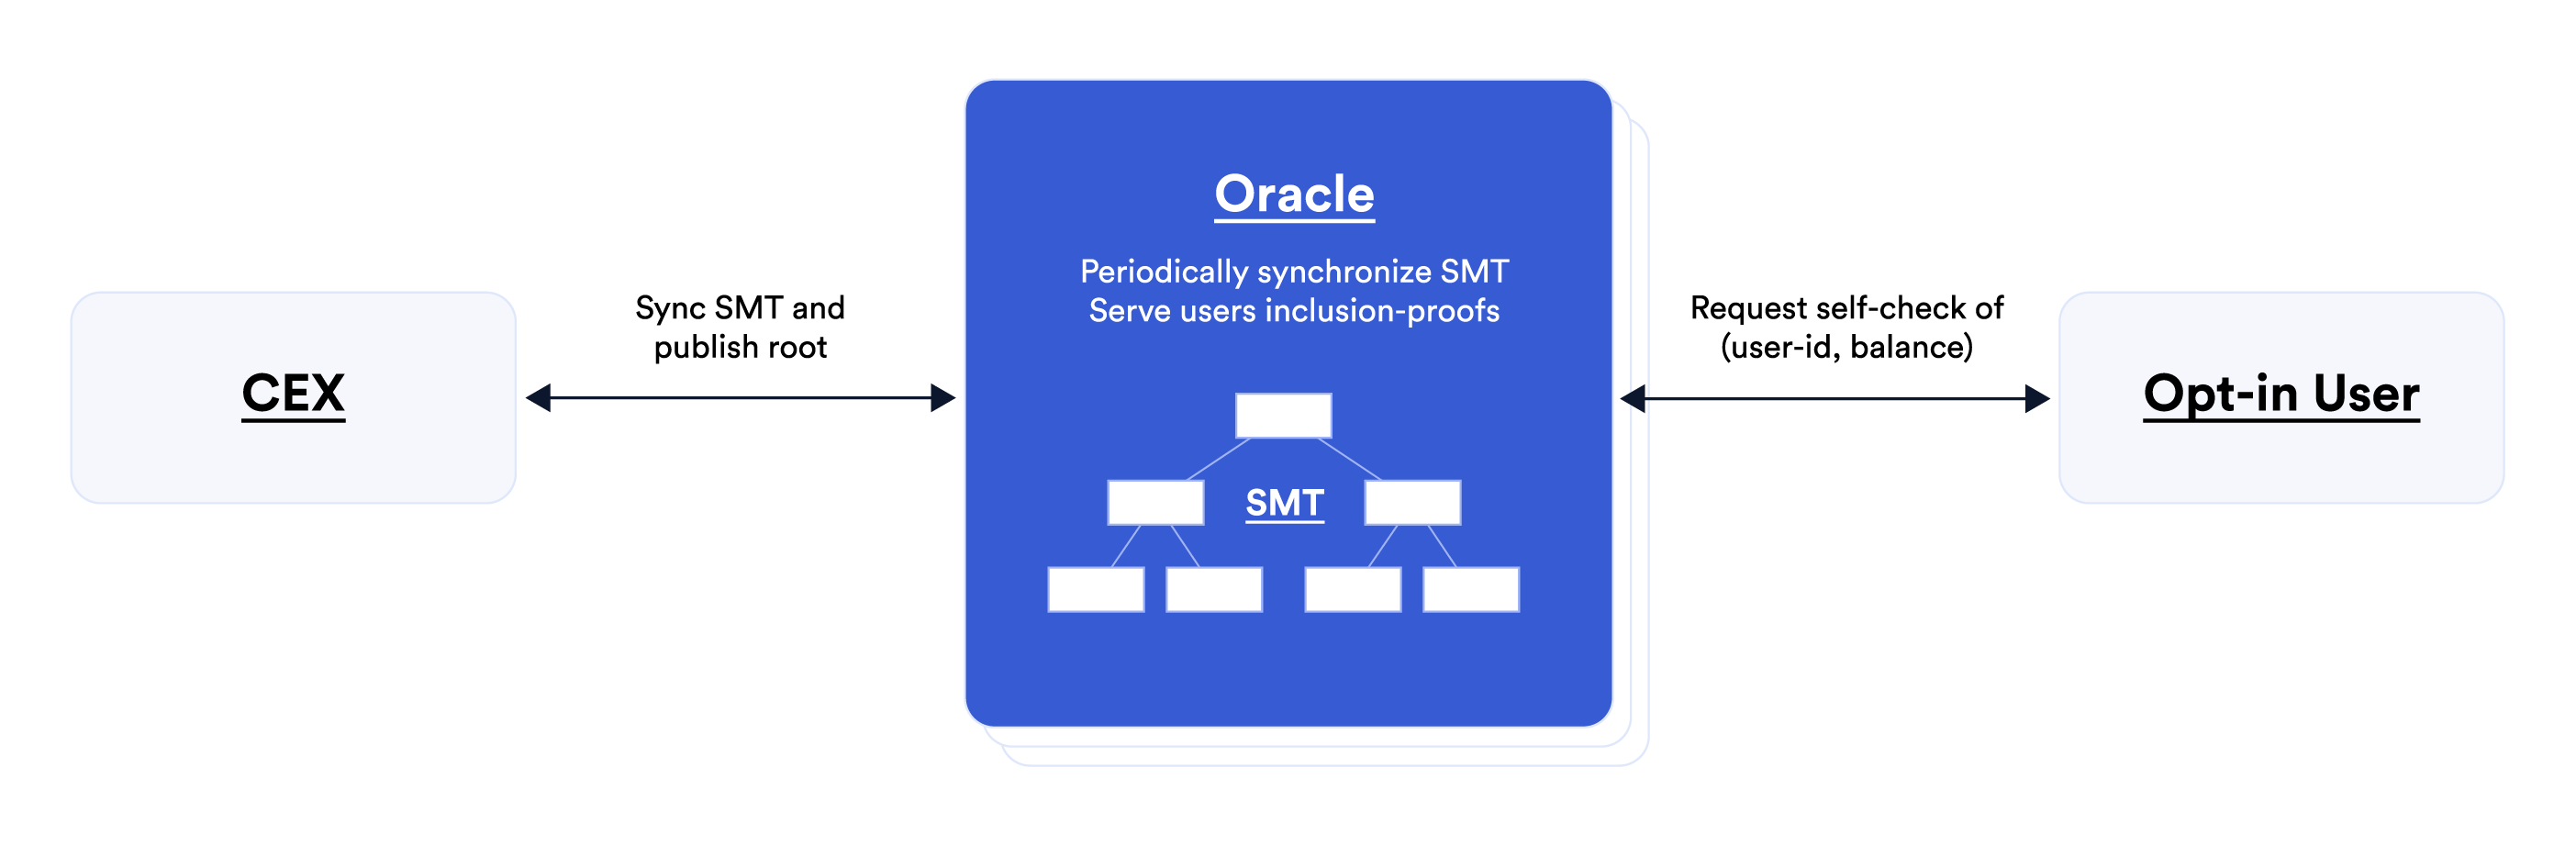 A diagram showing how oracles can store the SMT of commitments on behalf of the CEX.